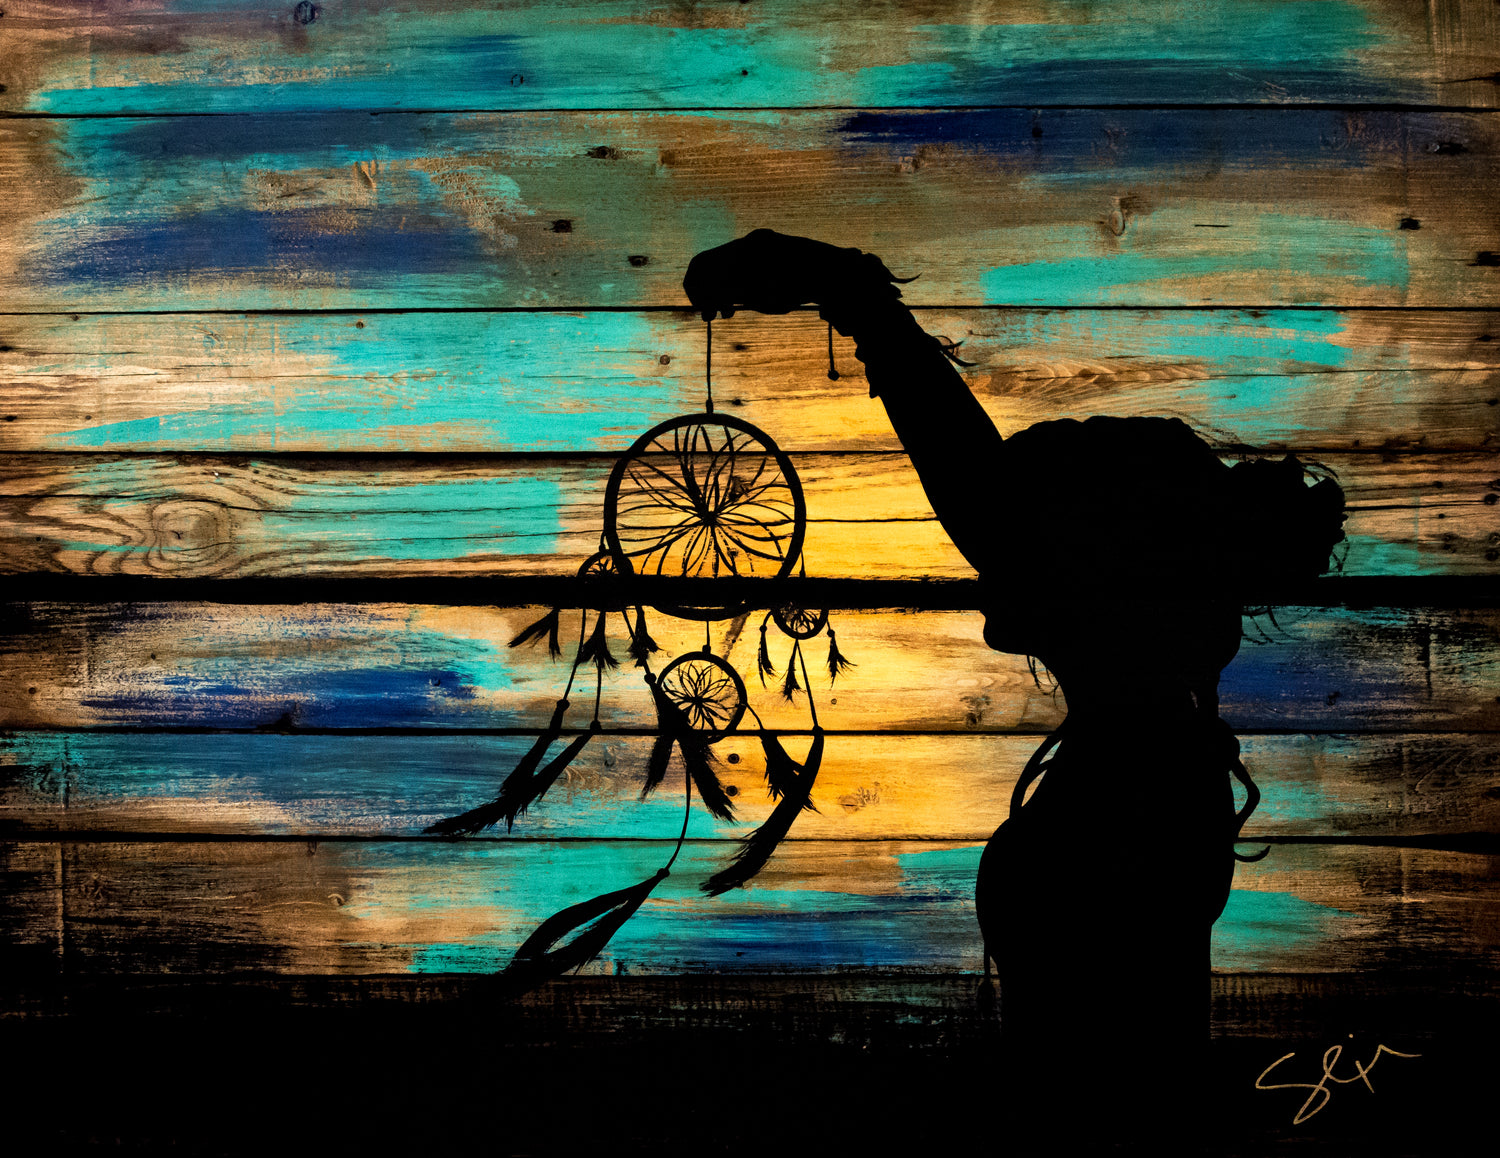 Abstract & Silhouette Art